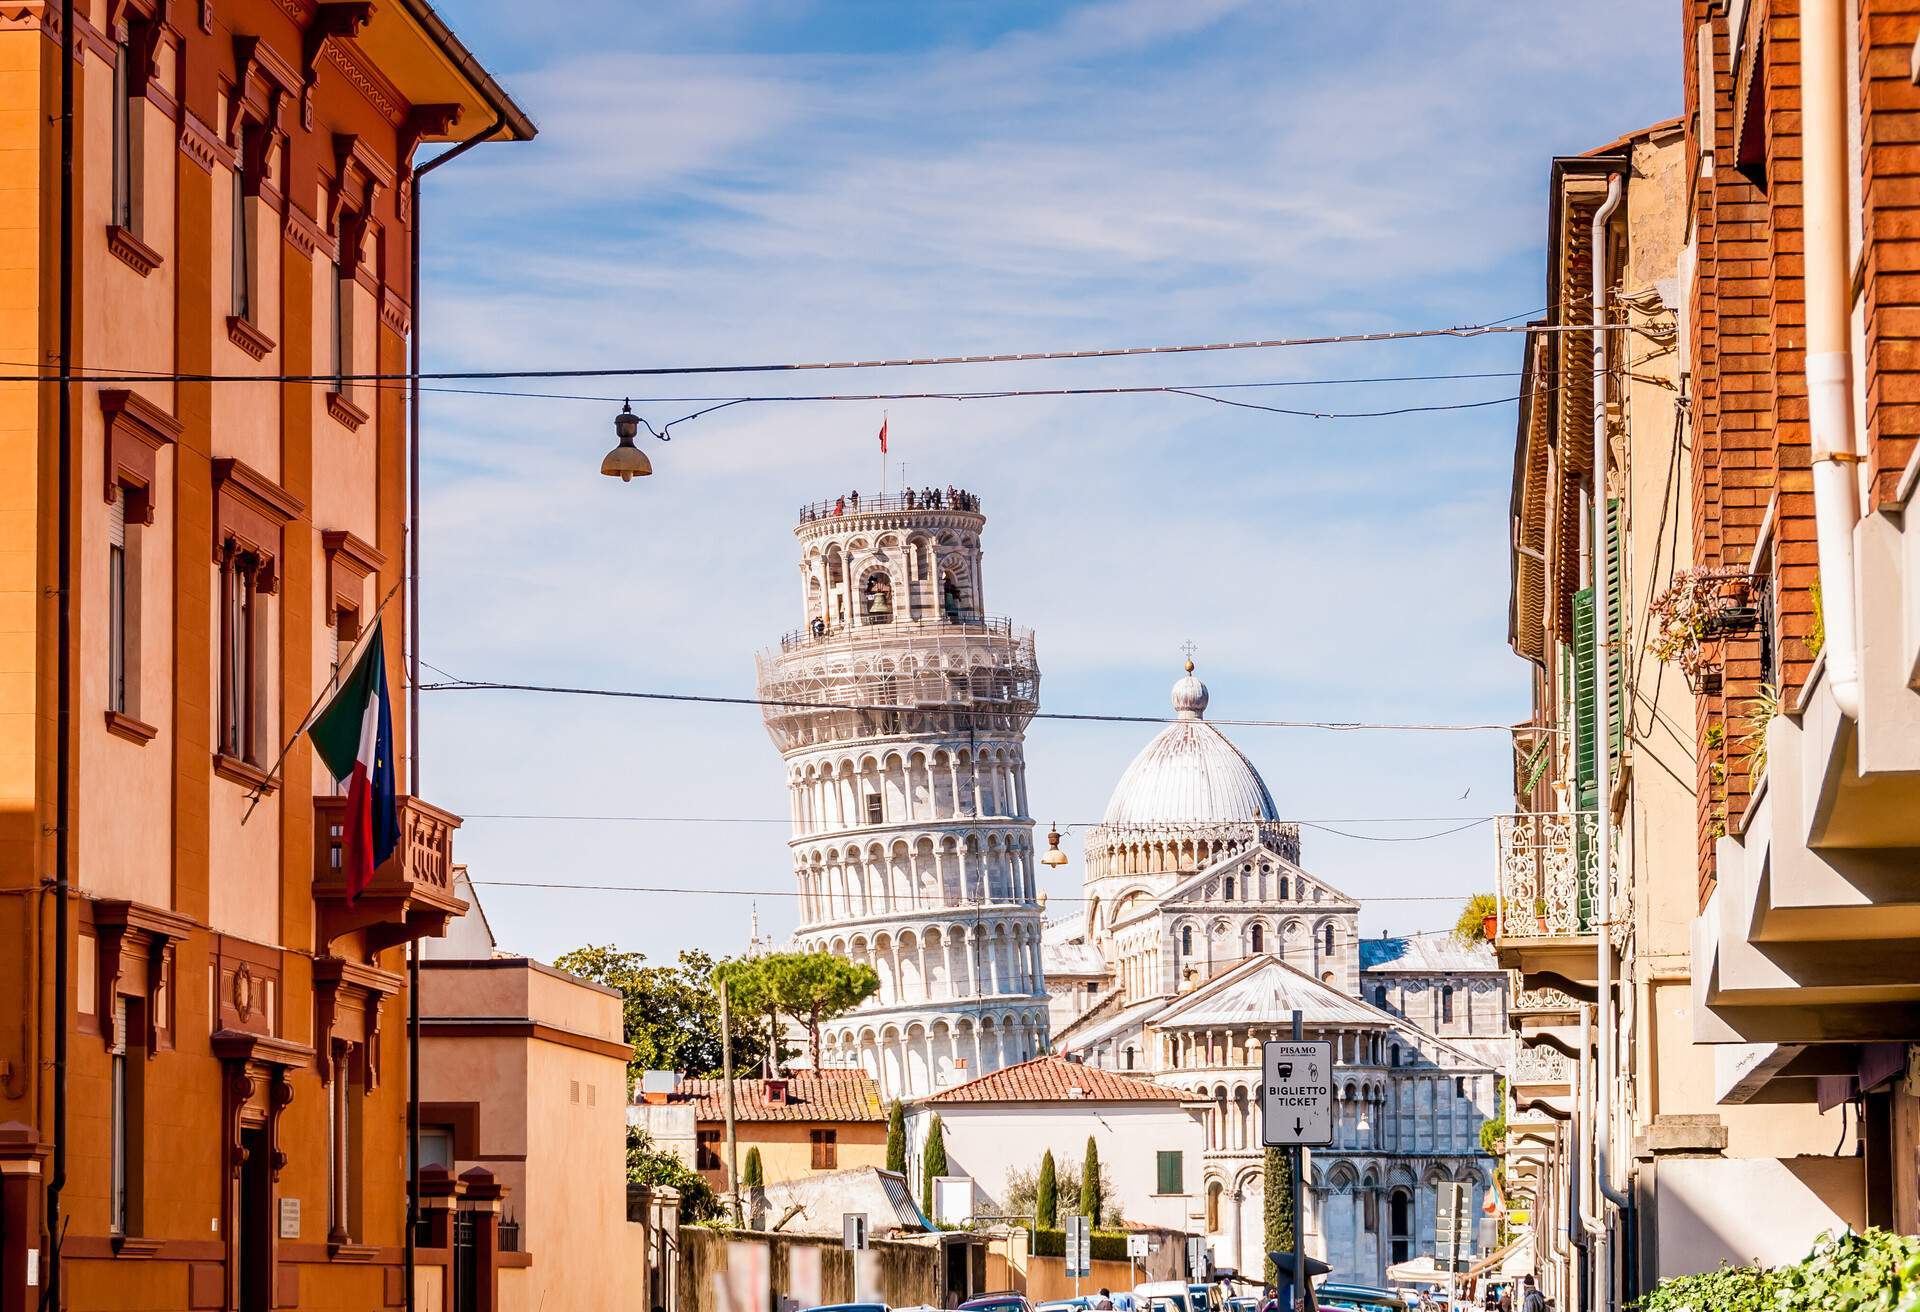 A charming street in Pisa leads to the iconic Campanile and cathedral in the distance.